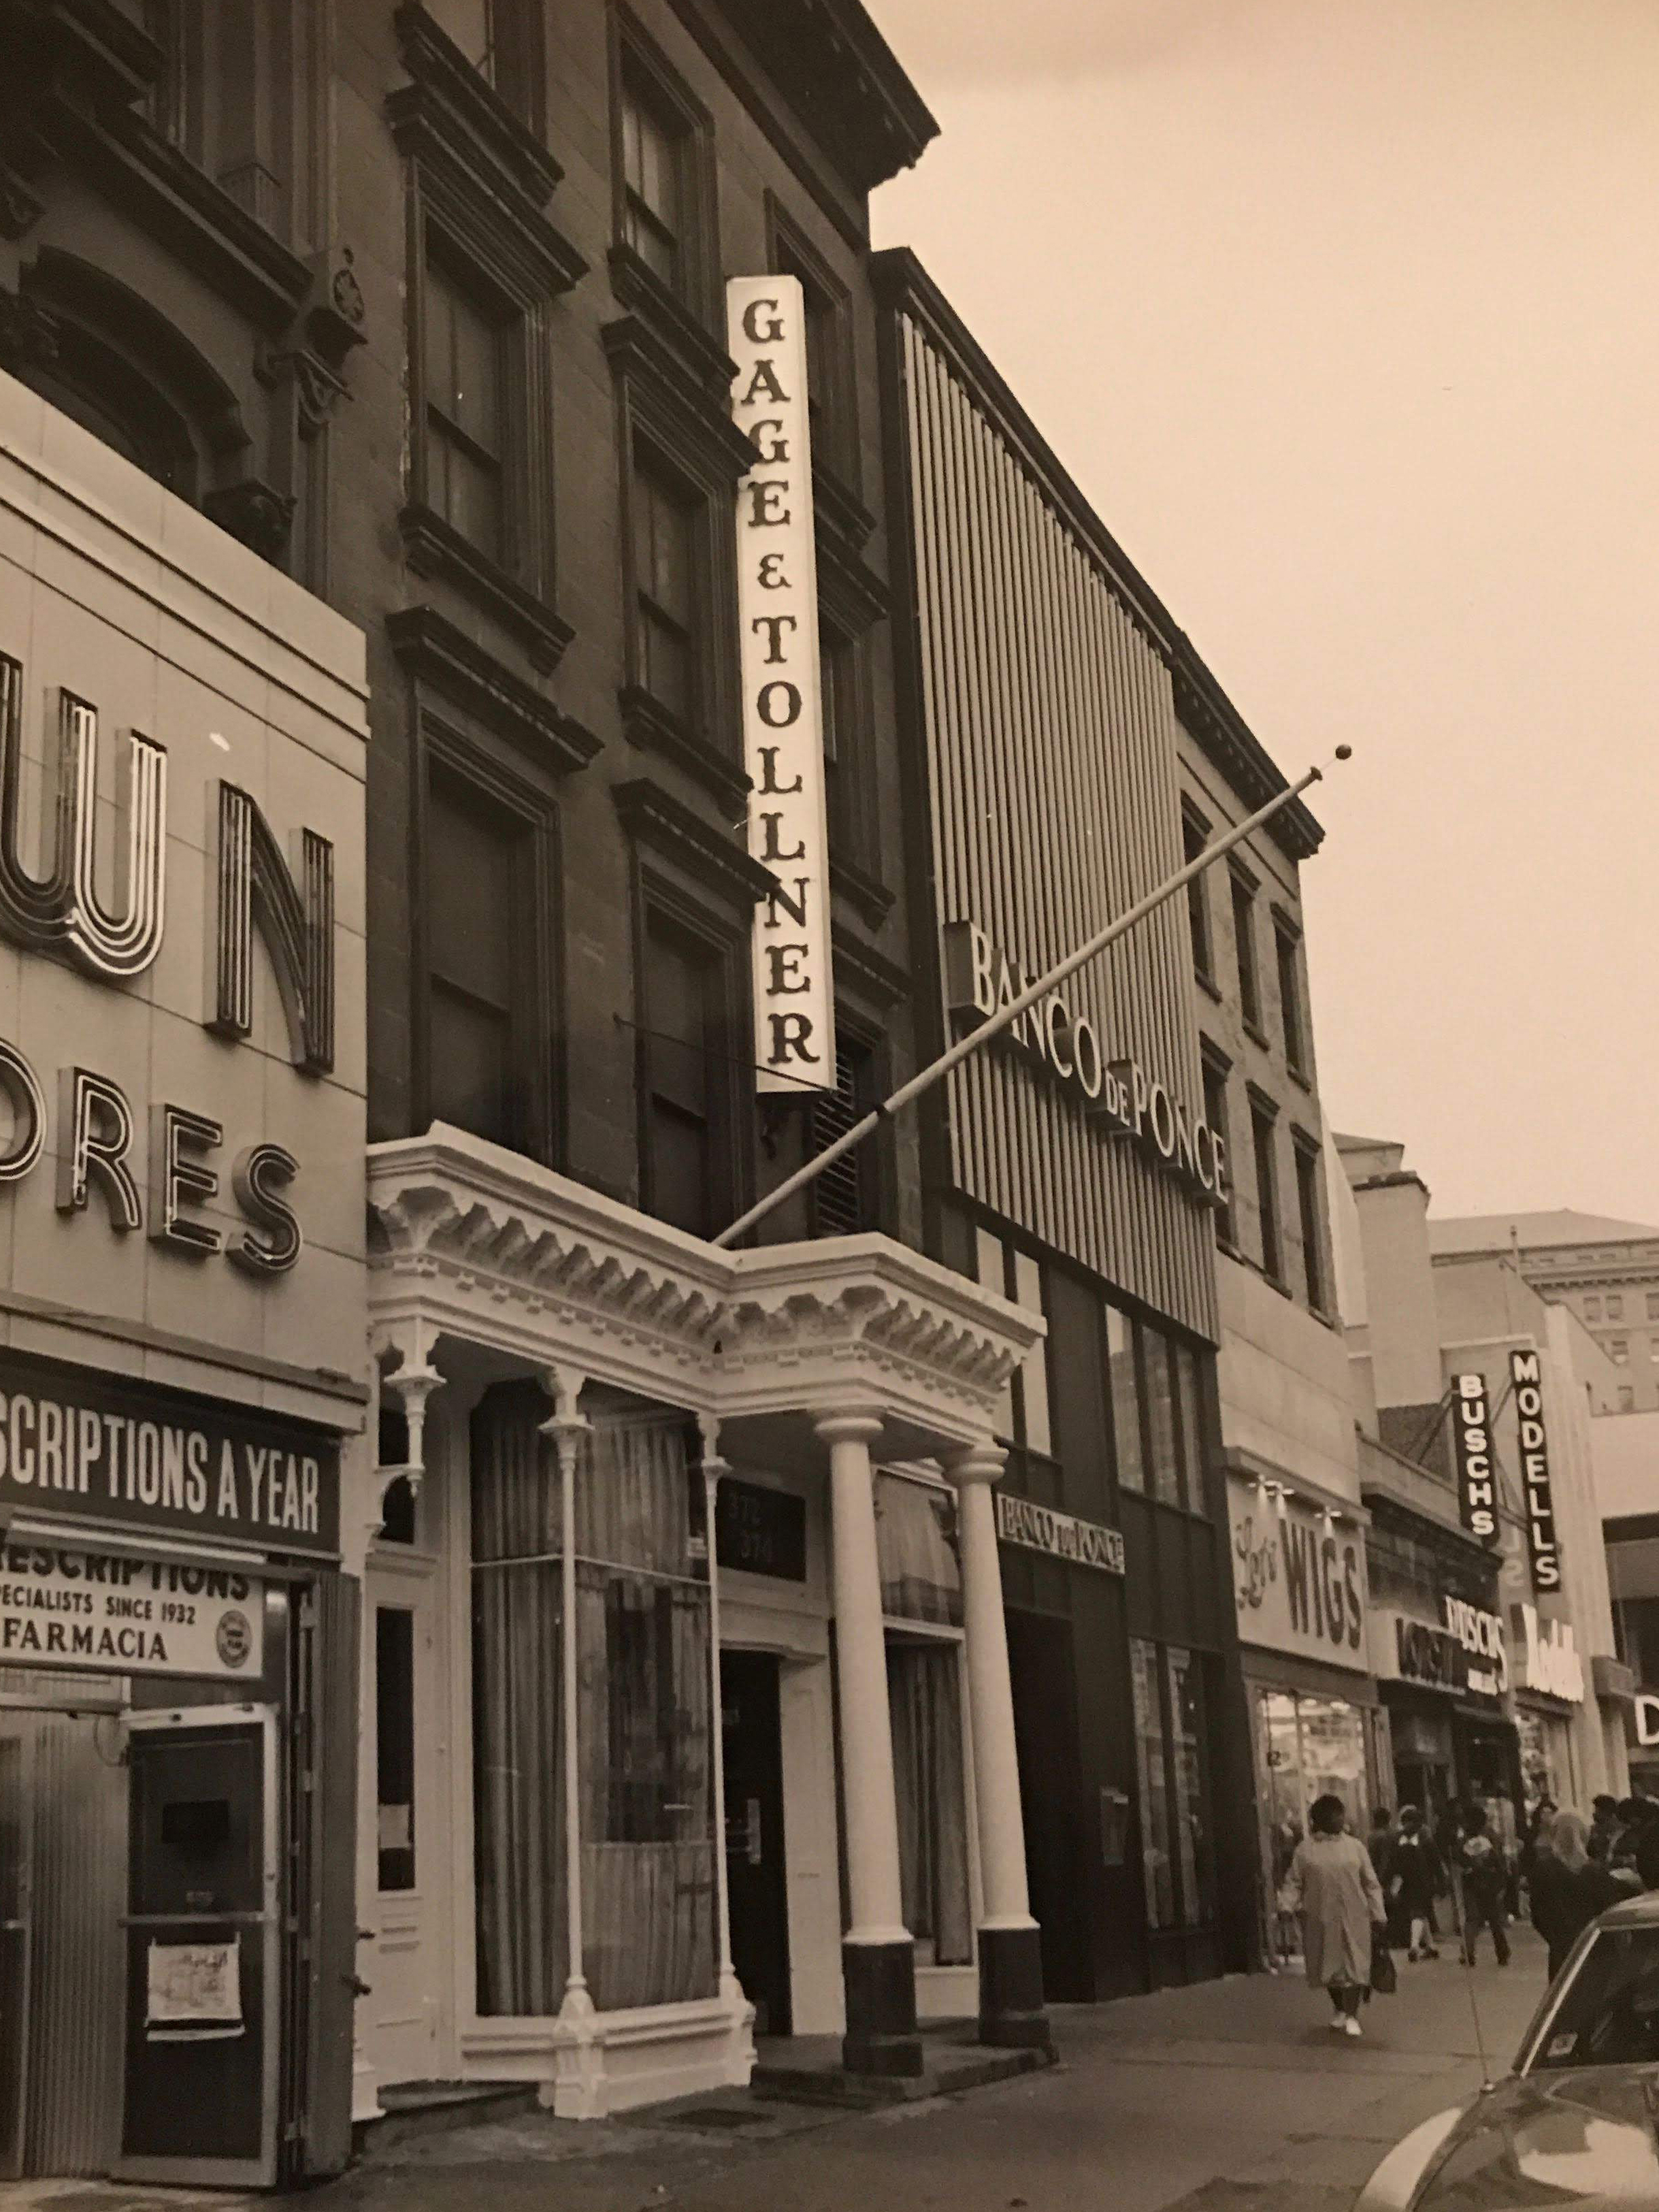 An old photo shows the 20th century Gage & Tollner sign. Photo courtesy of the Brooklyn Historical Society.